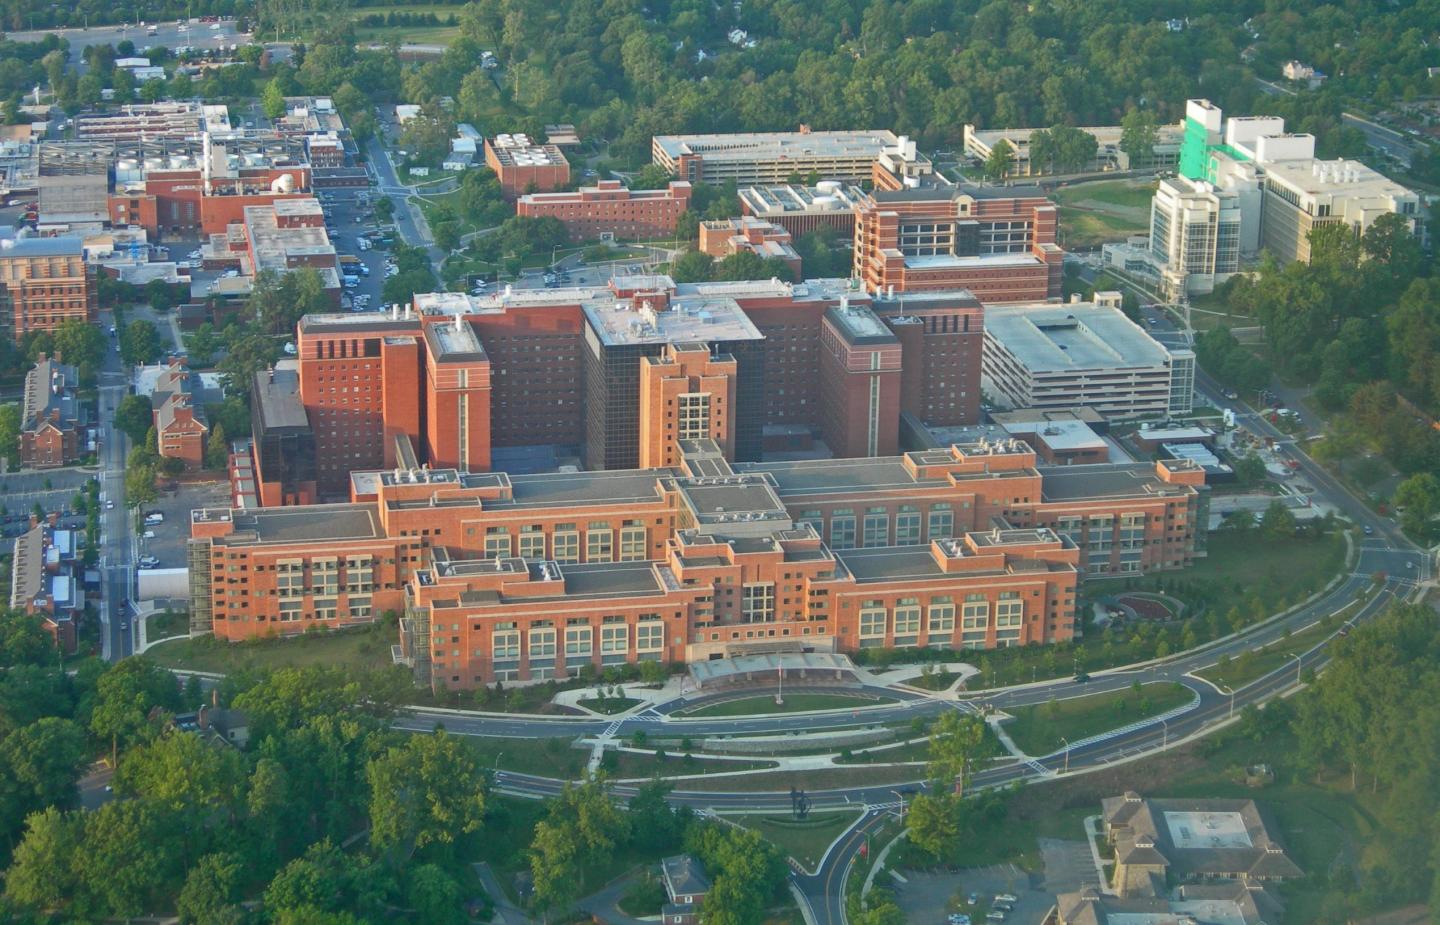 NIH Clinical Center